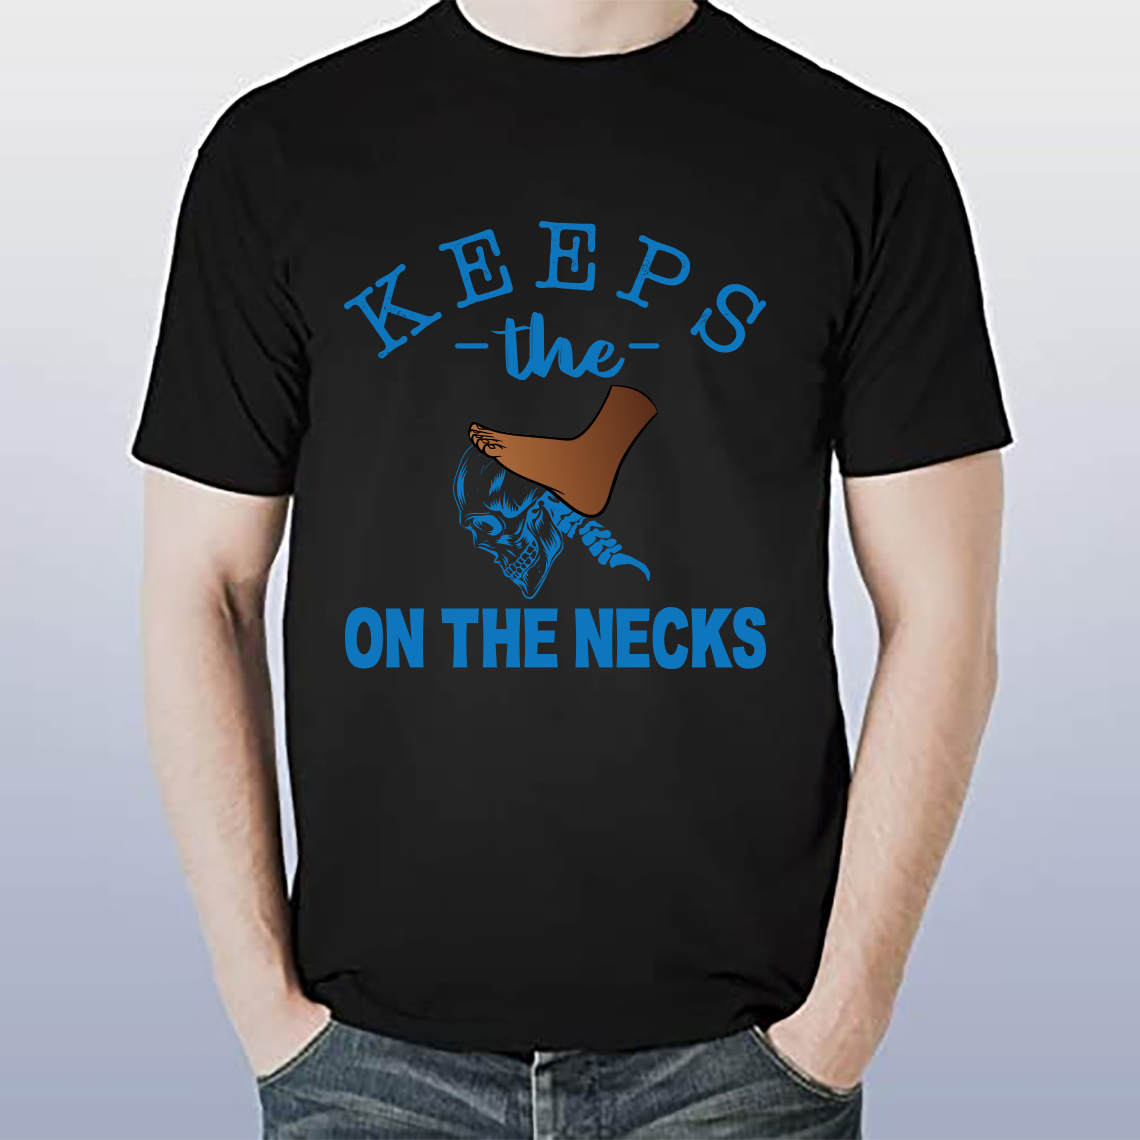 T shirt design keeps the foot on the neck